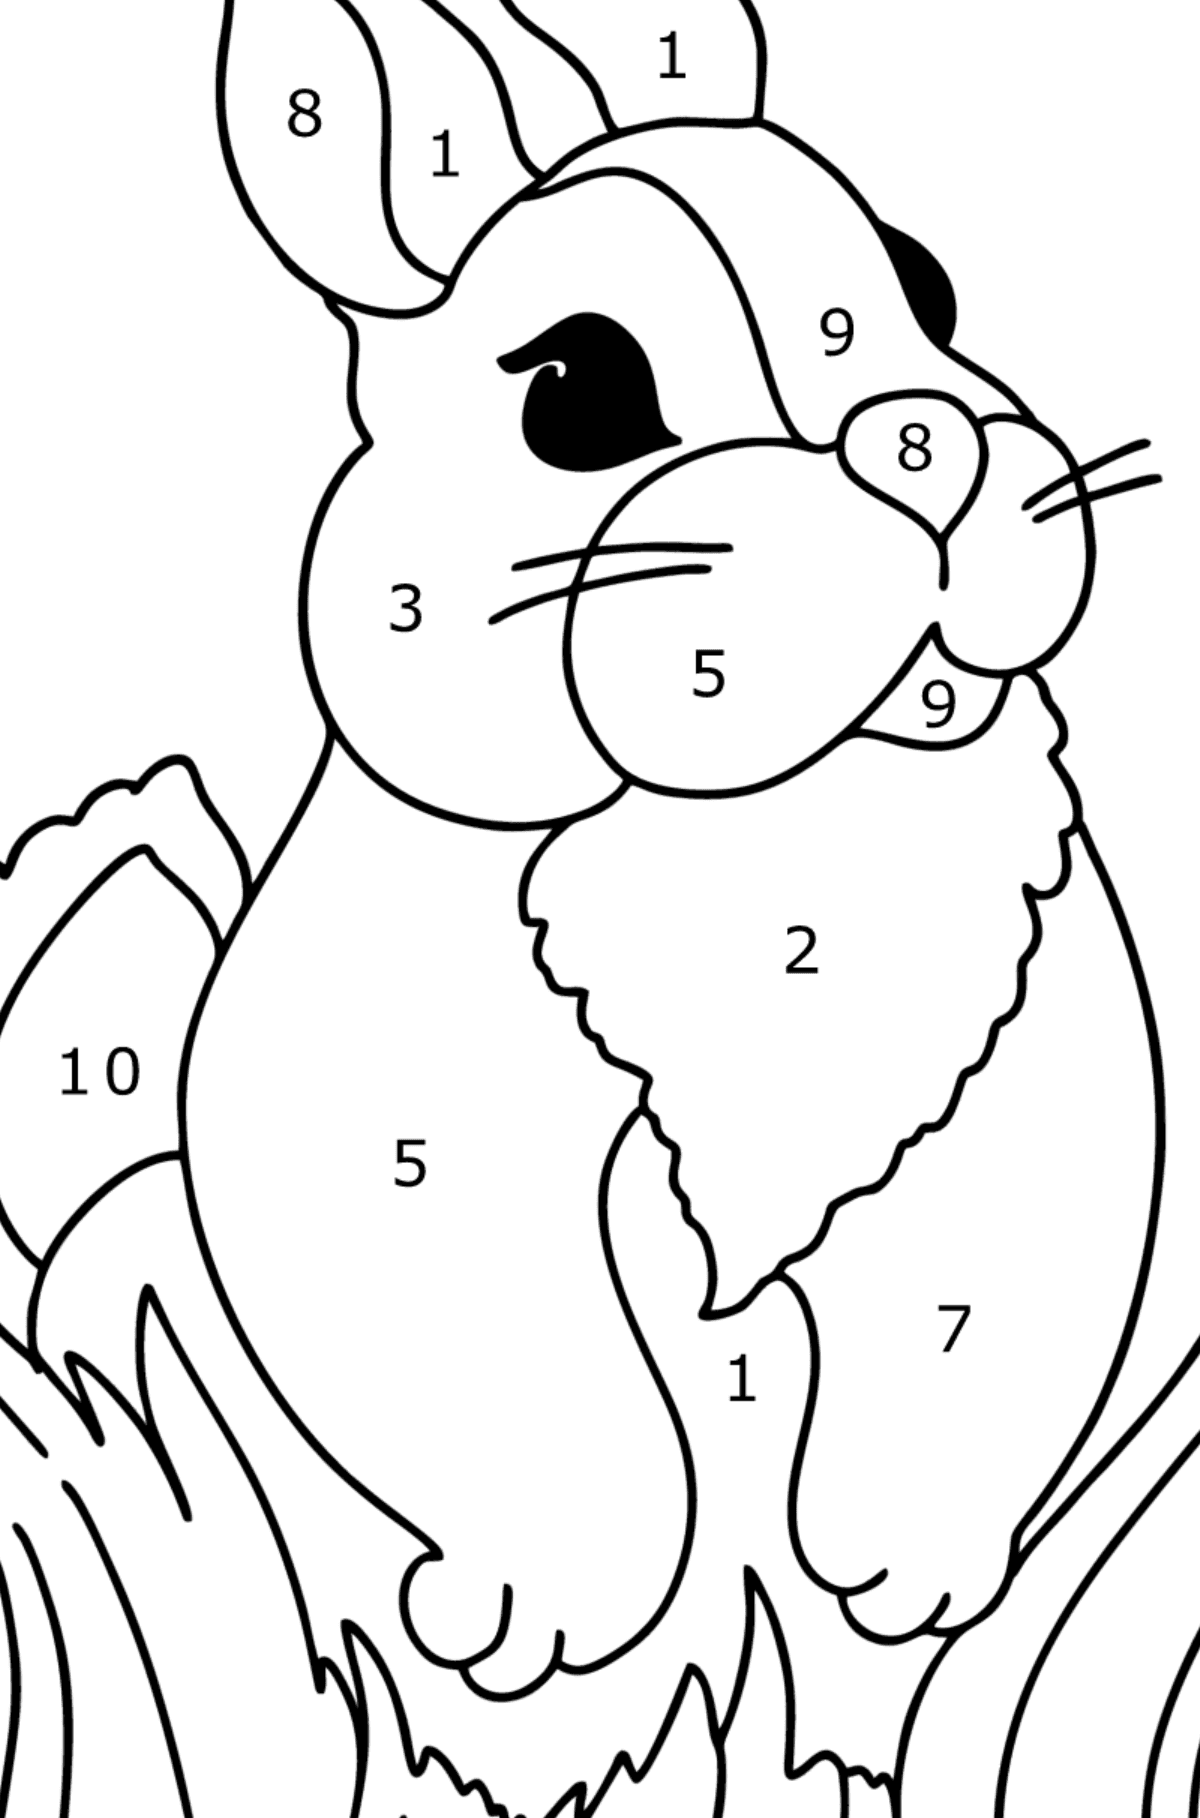 Fluffy Bunny Coloring page - Coloring by Numbers for Kids